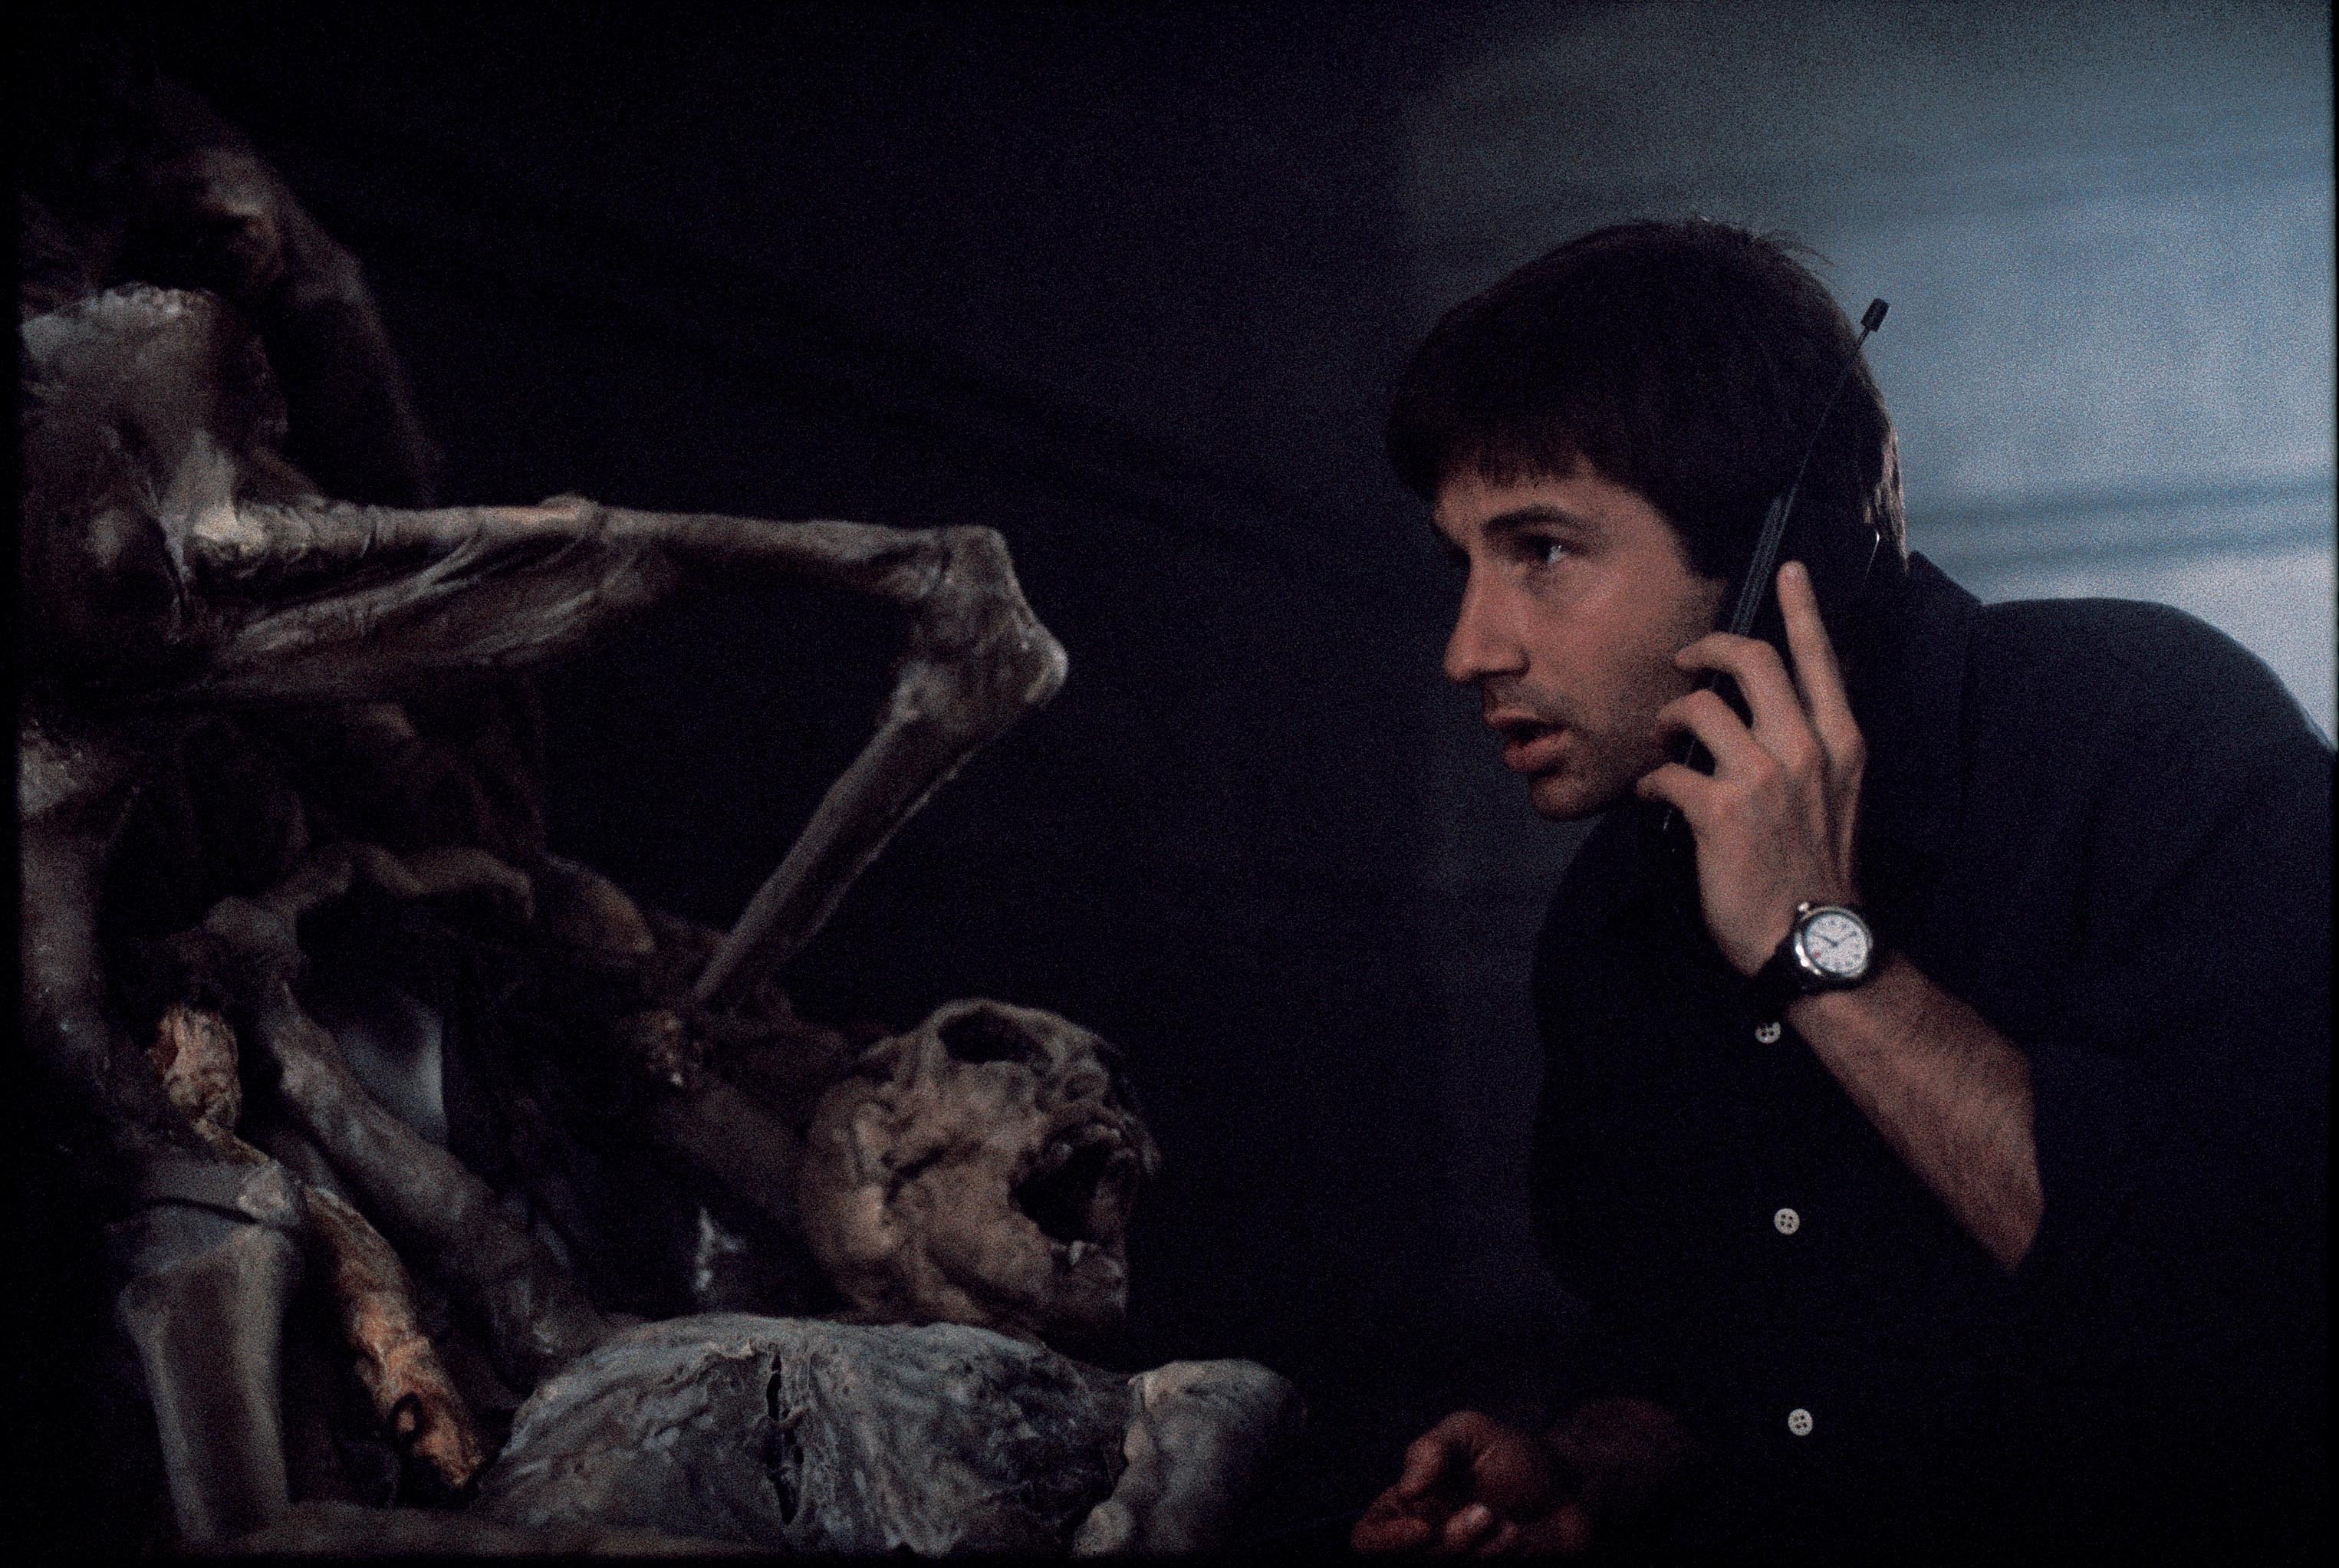 Mulder inspects evidence of an alien conspiracy.